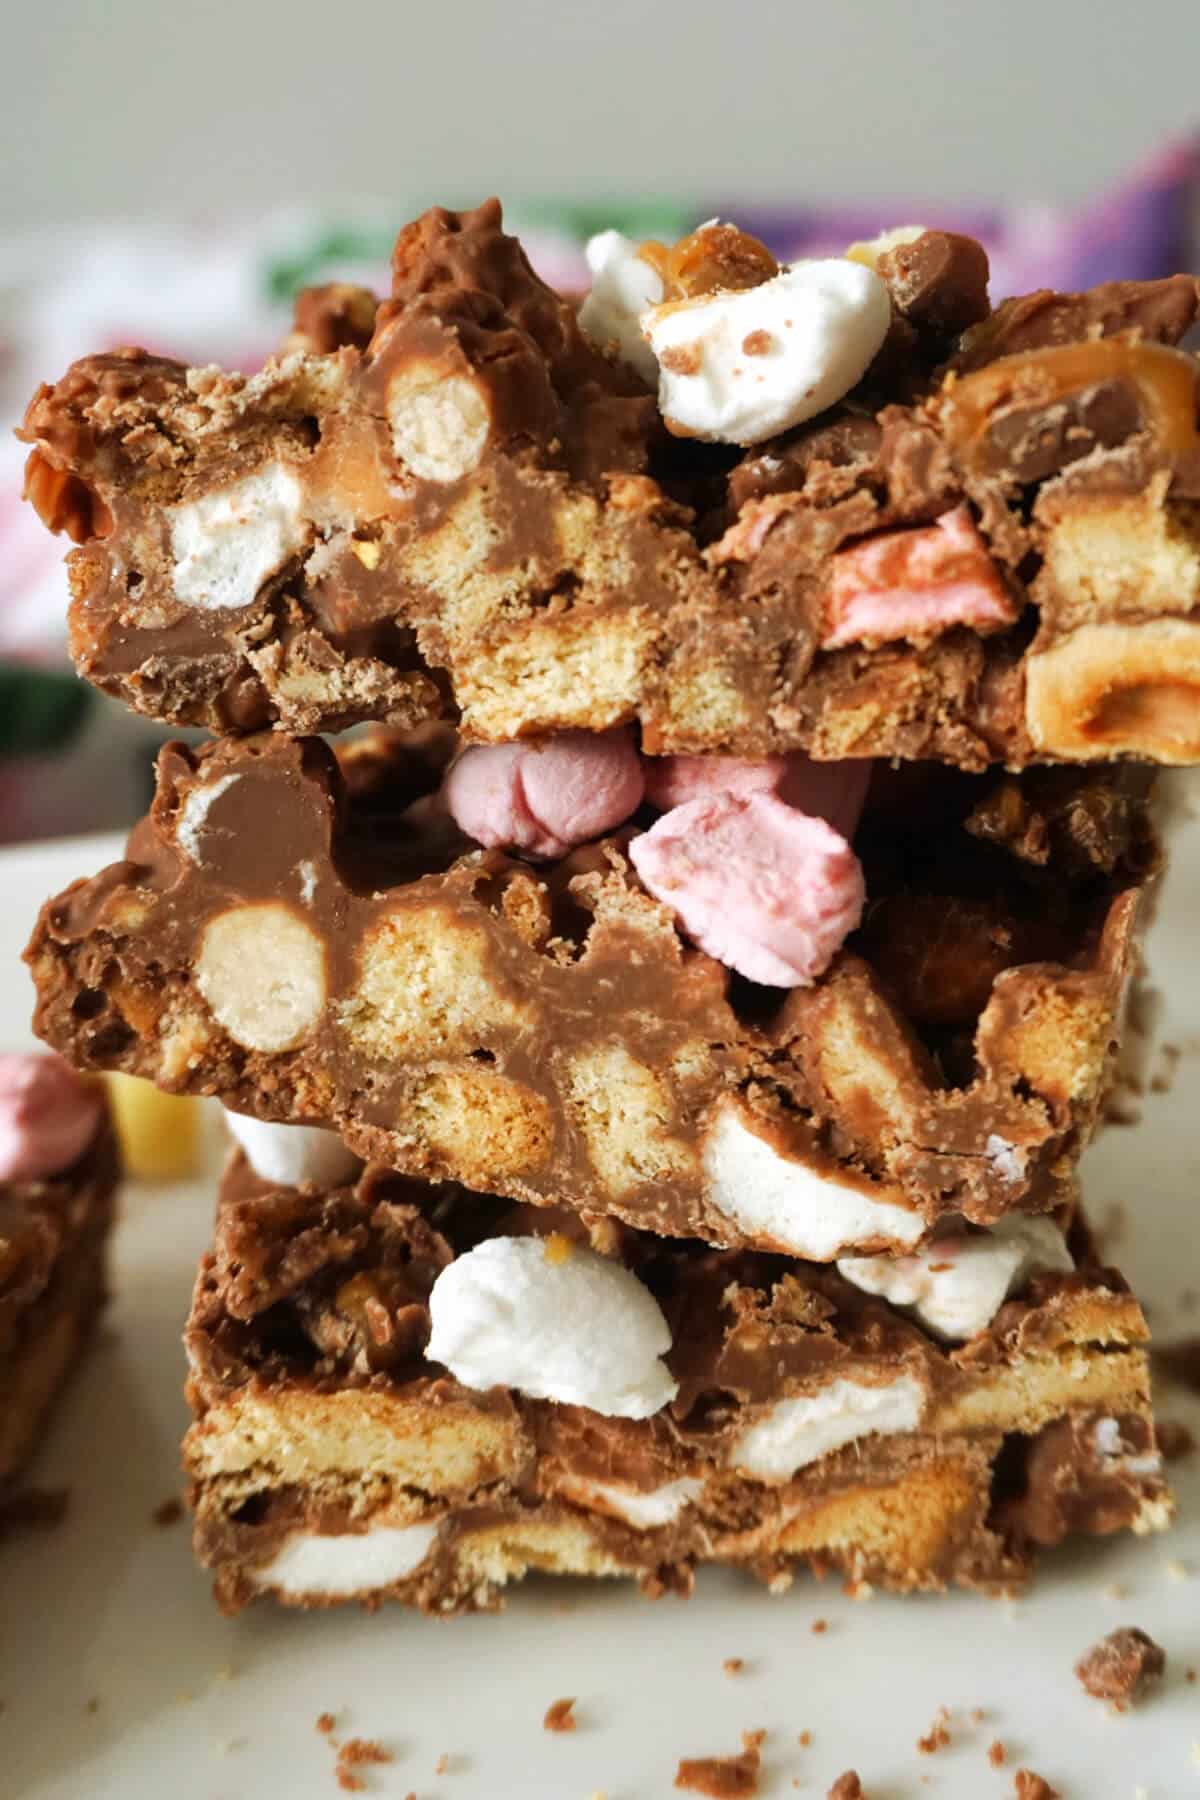 A stack of 3 slices of rocky road.